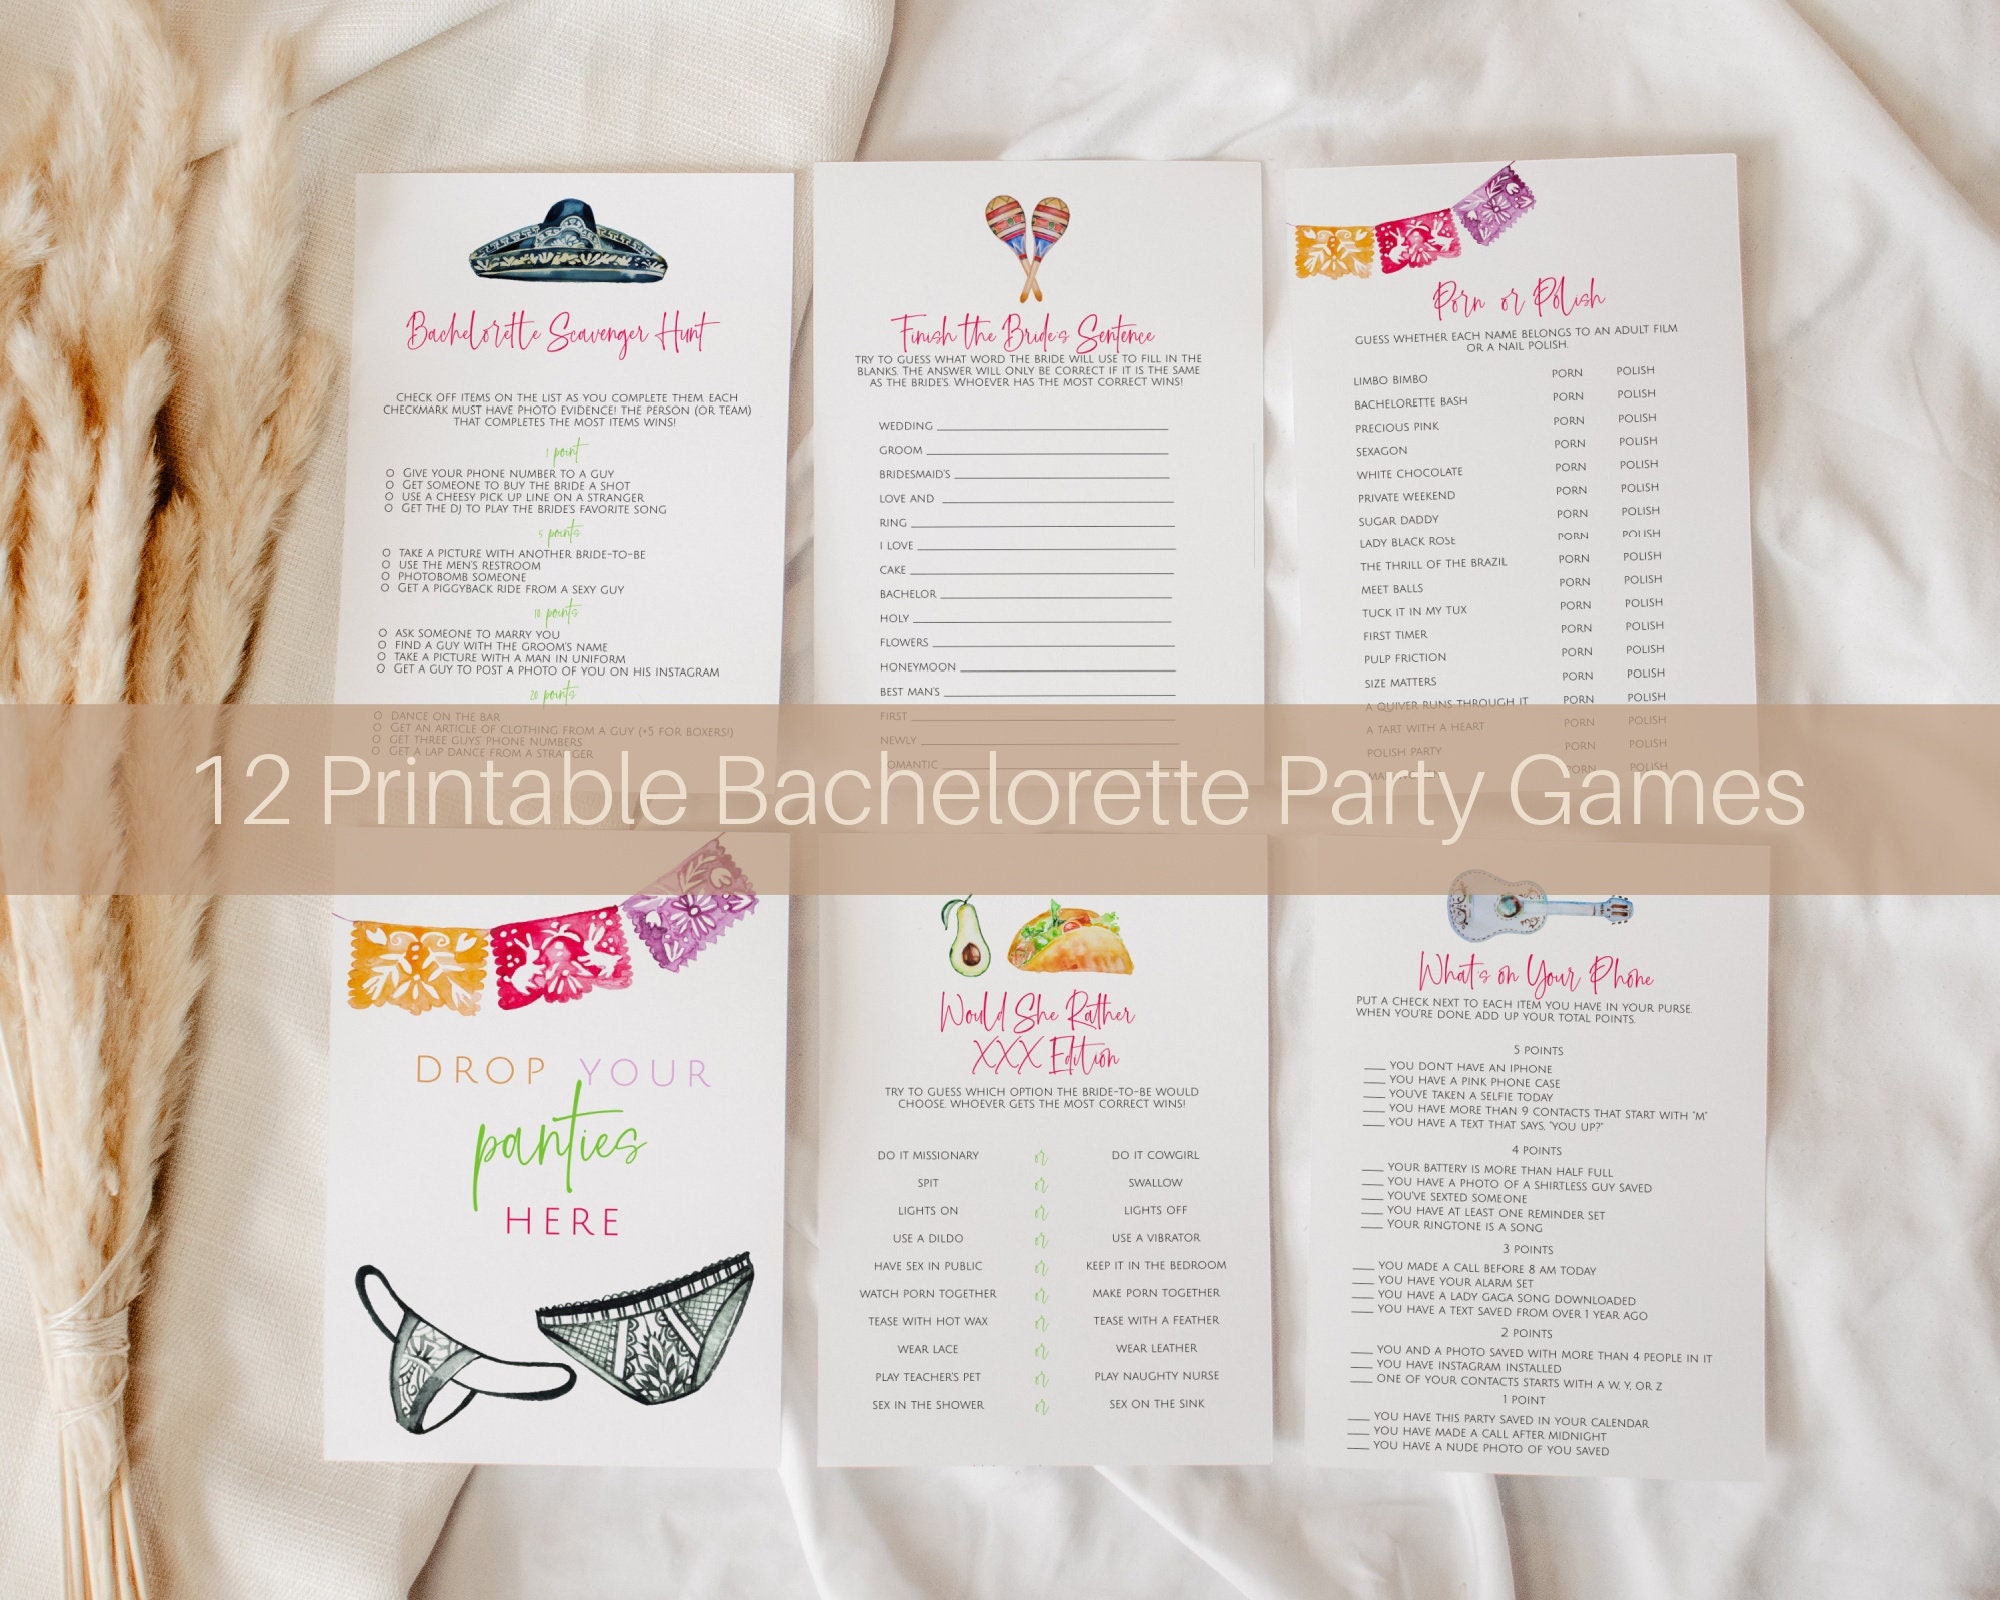 Pour Decisions Hangover, Hangover Kit, Bachelorette Party, Bubbly, Bridal  Party, Recovery Kit, Champagne , Birthday, Bday Girl 